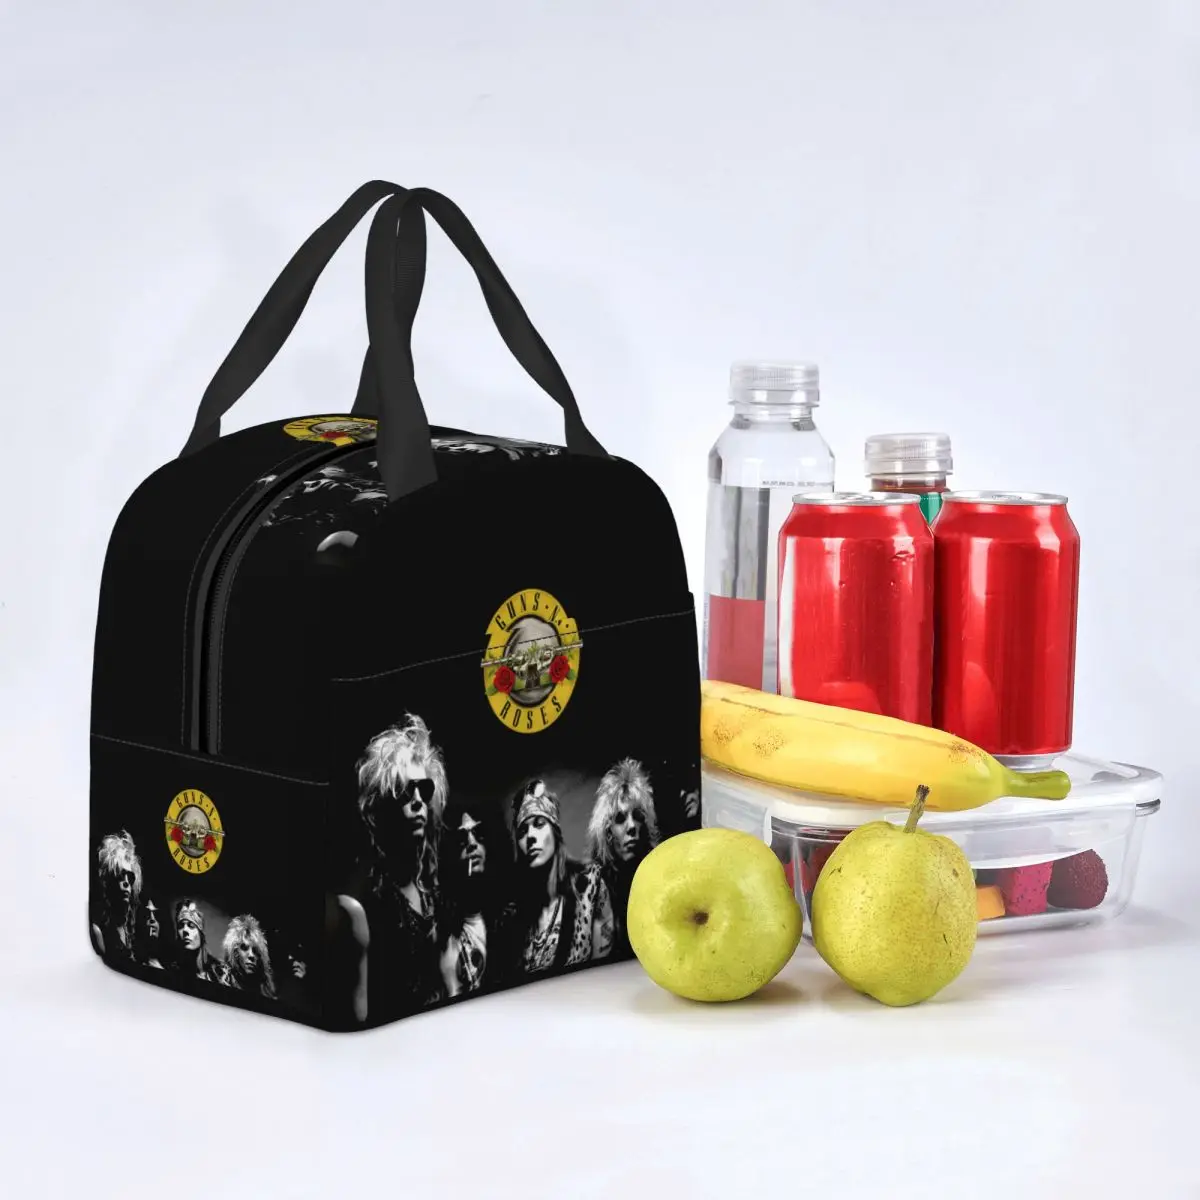 Lunch Bag Rock Band Guns N Roses Insulated Cooler Portable Picnic Oxford Lunch Box Bento Pouch images - 6